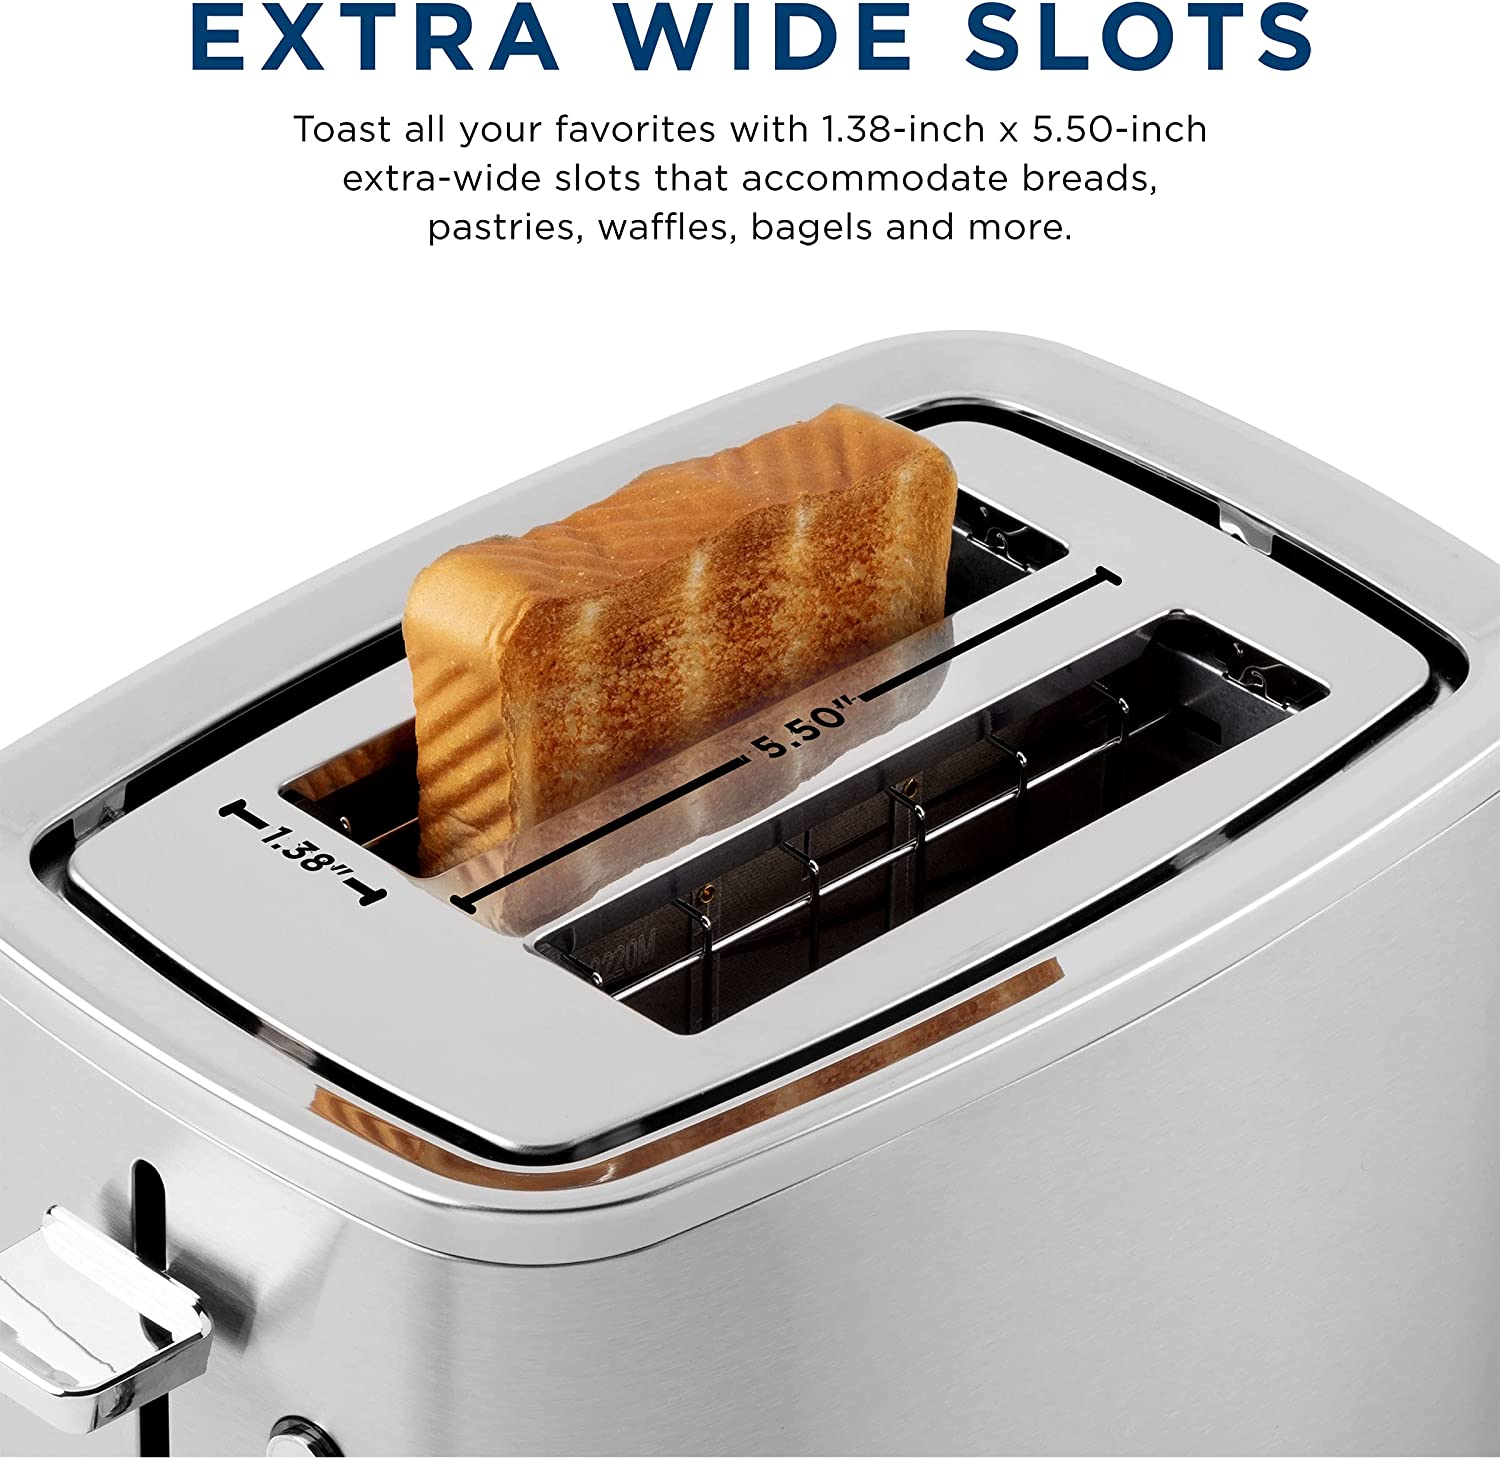 GE Appliances 4-Slice Toaster in Stainless Steel